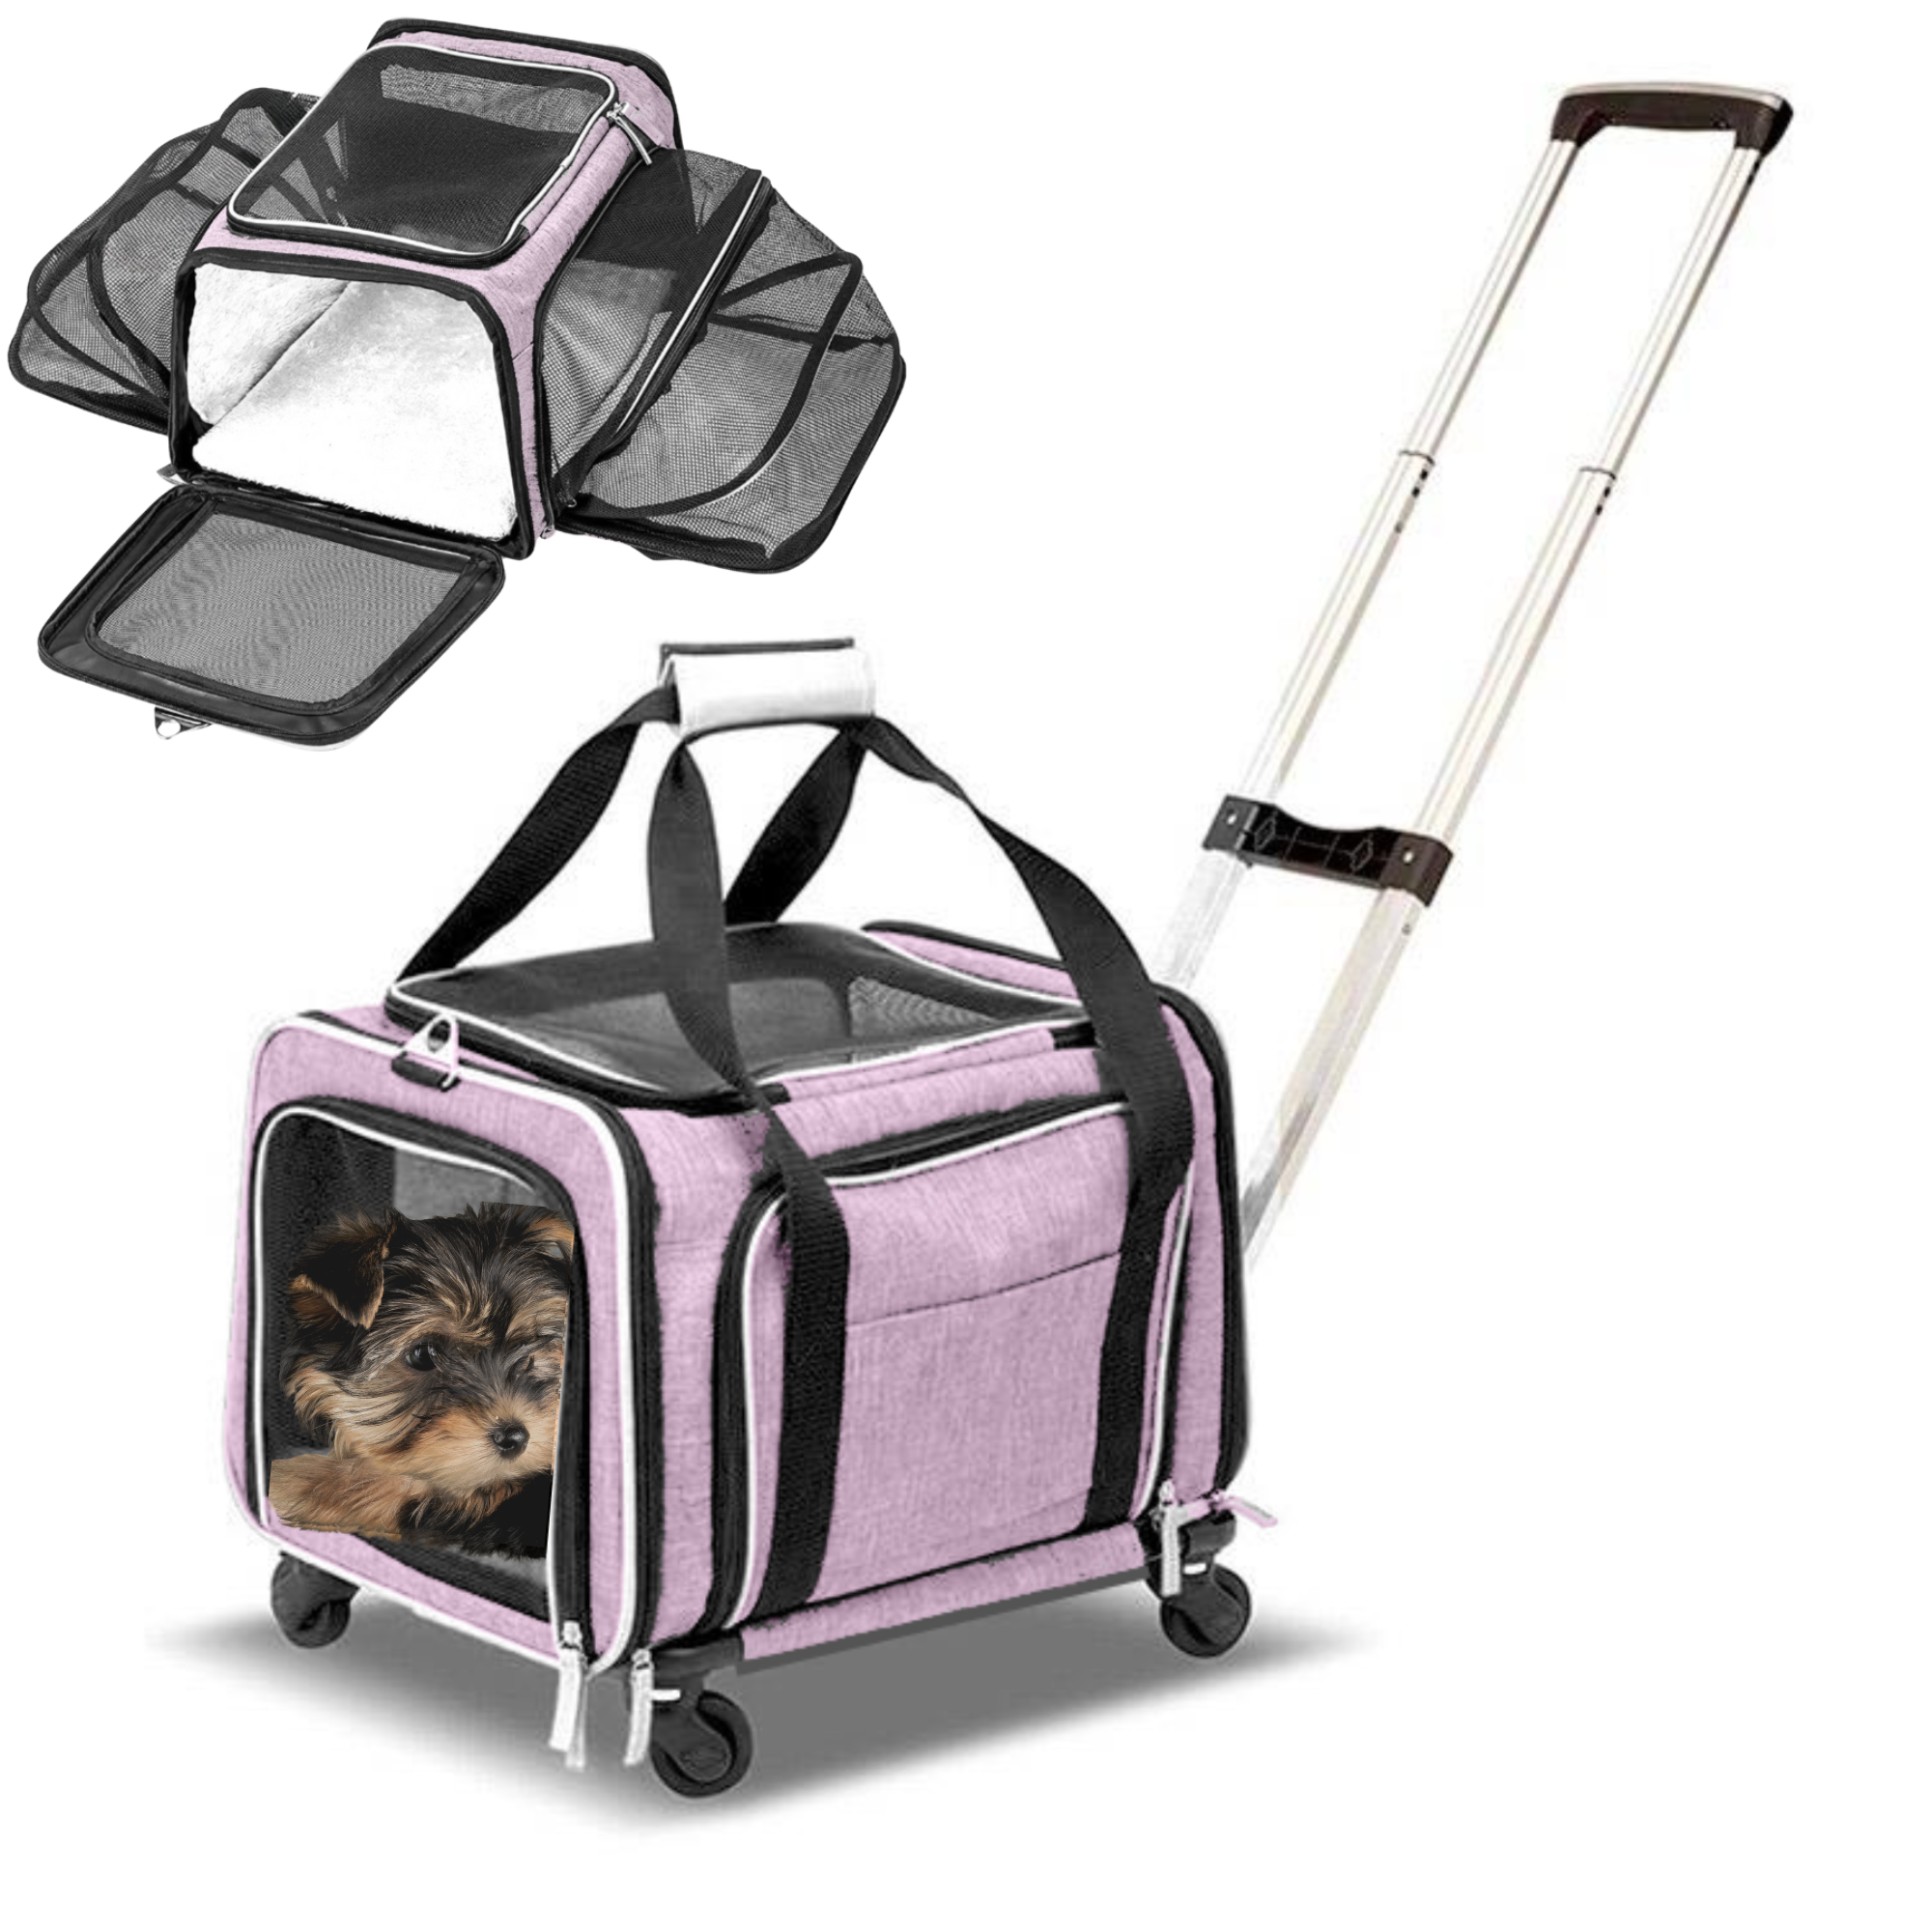 RUFF LIFE 101 Airline Approved Expandable Premium Pet Carrier on